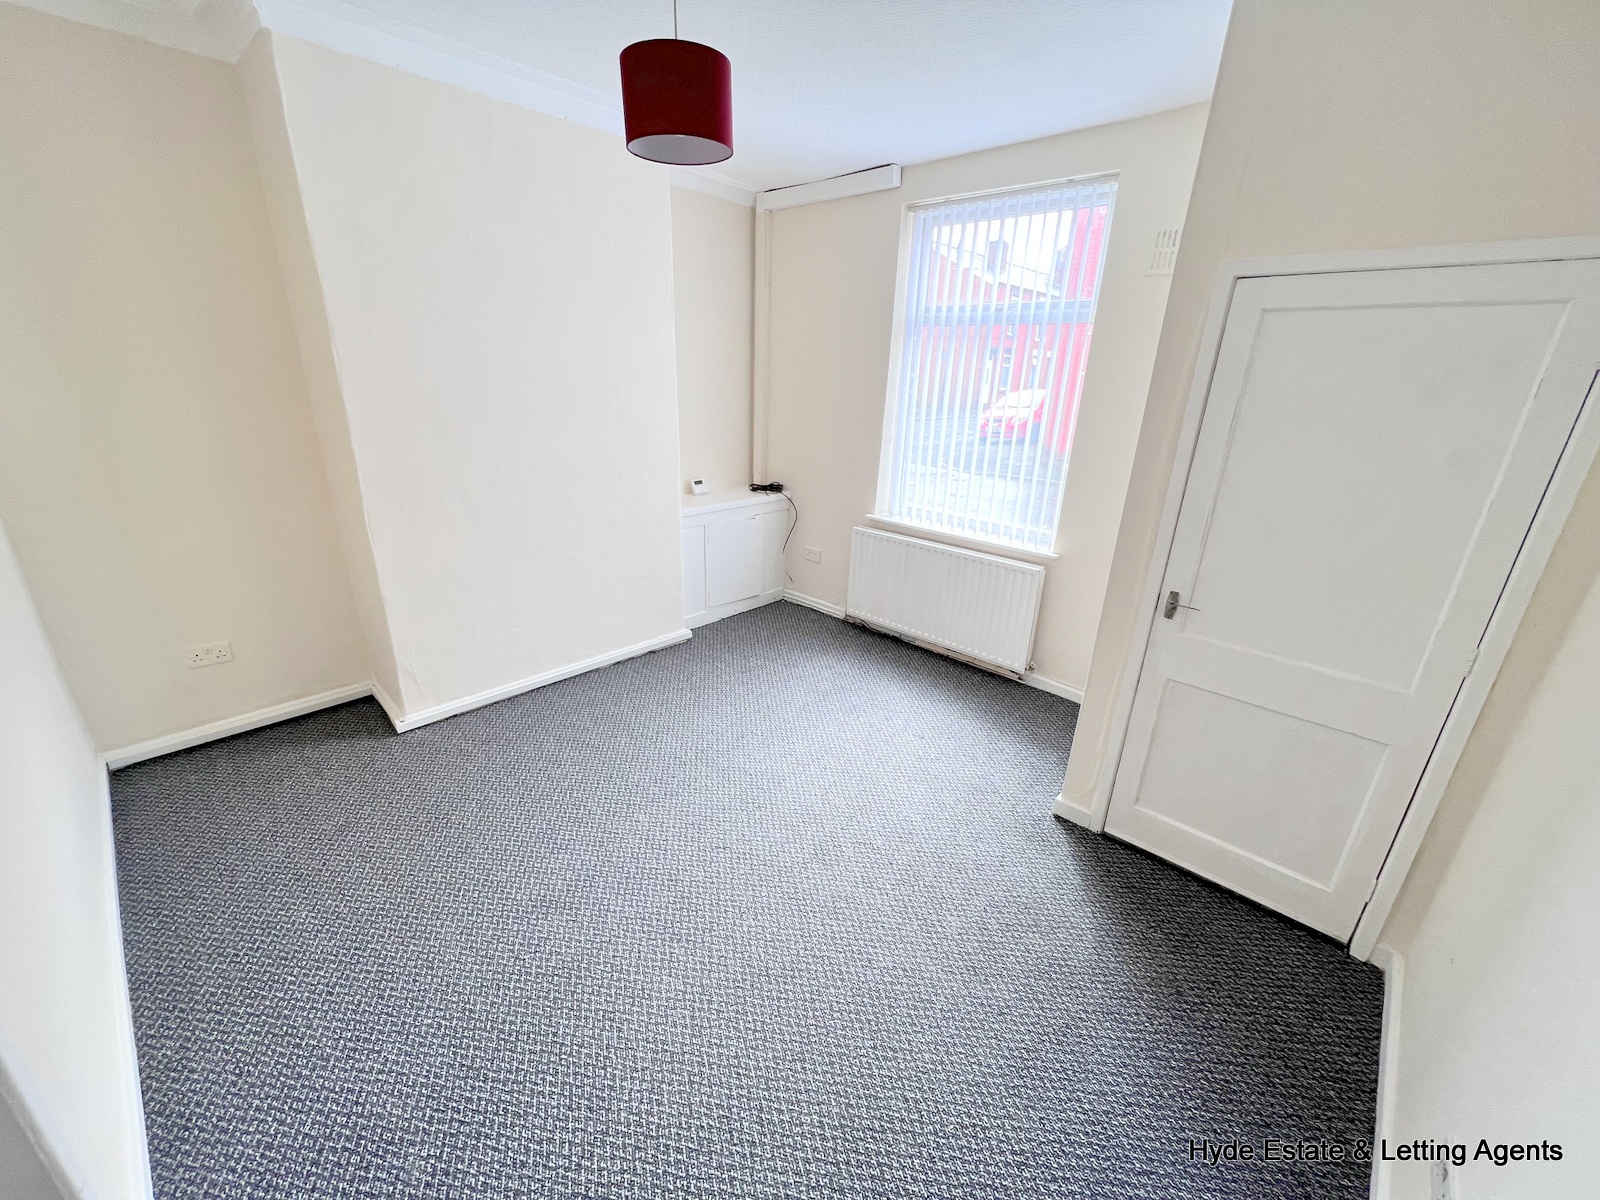 Images for Goole Street, Openshaw, M11 2AU, Manchester